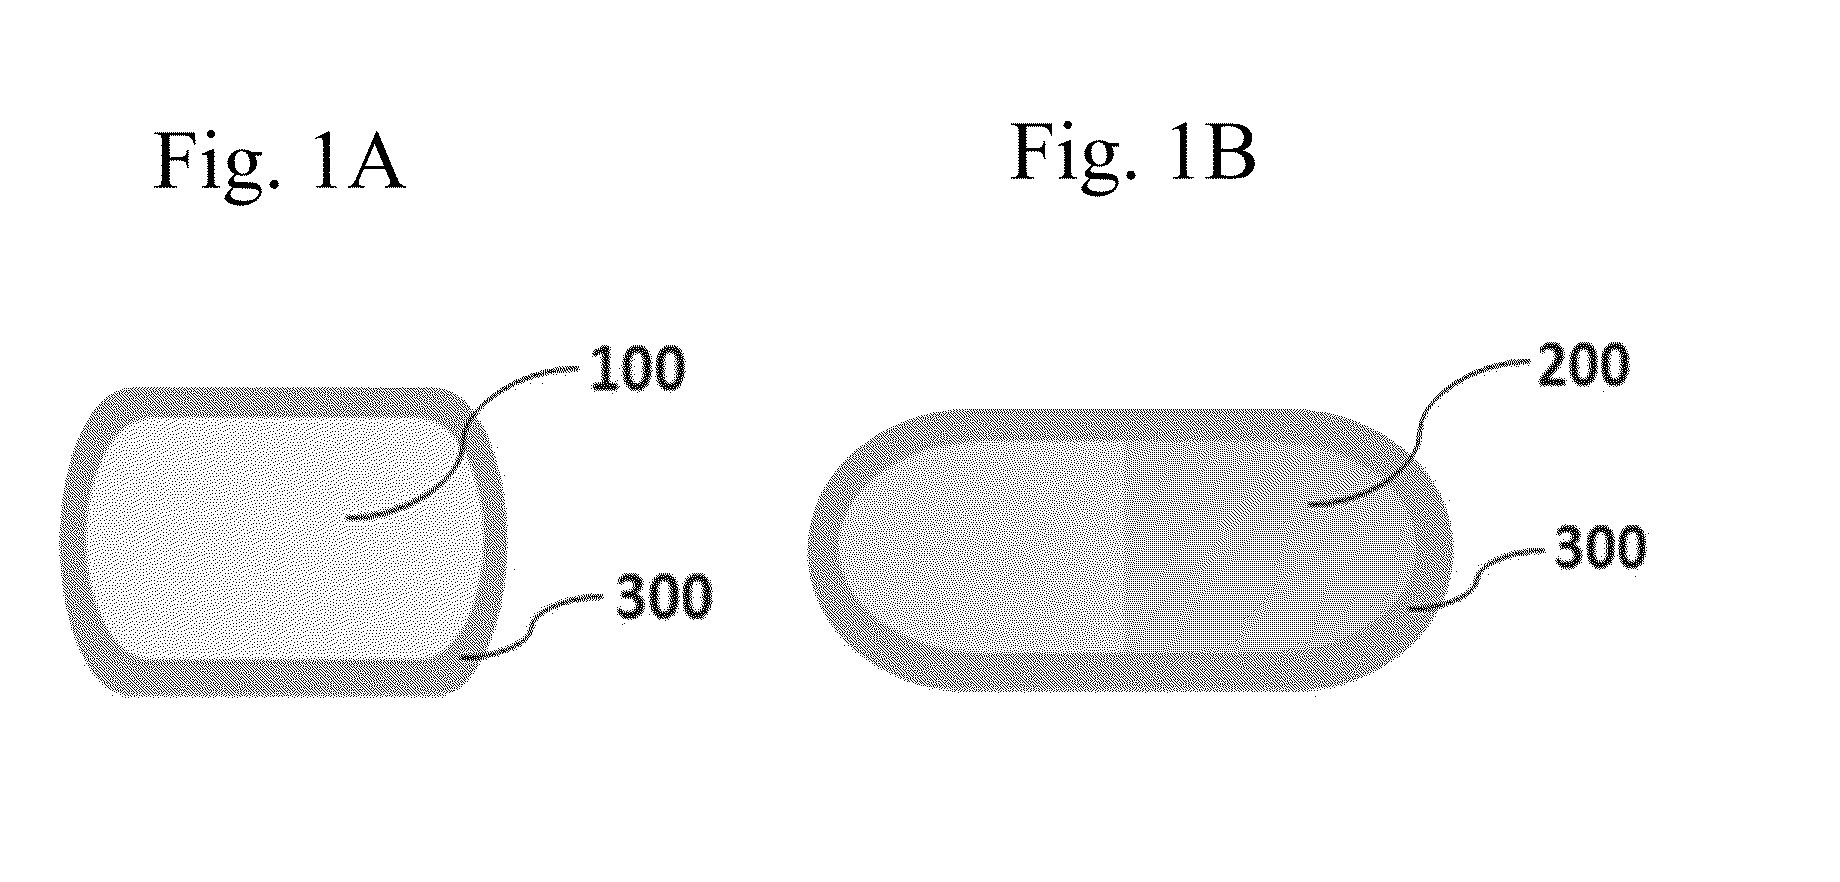 Composite formulation comprising a film coating layer containing rosuvastatin or a pharmaceutically acceptable salt thereof